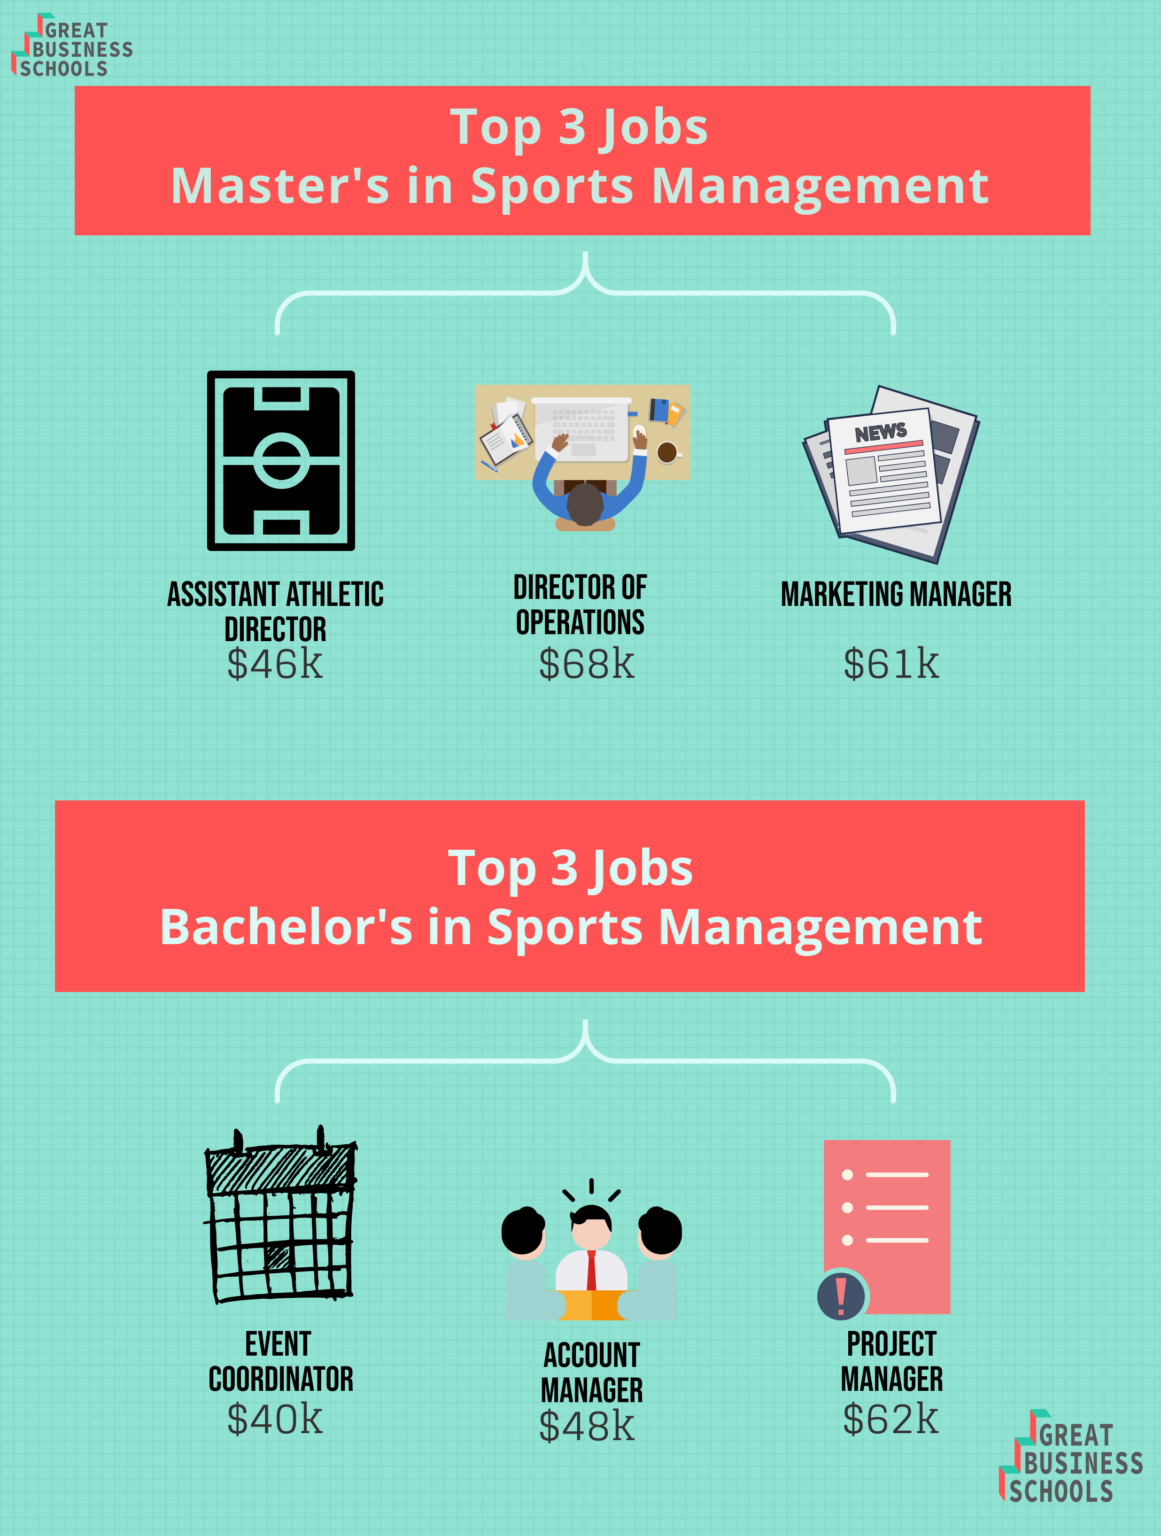 What jobs are available with a sports marketing degree